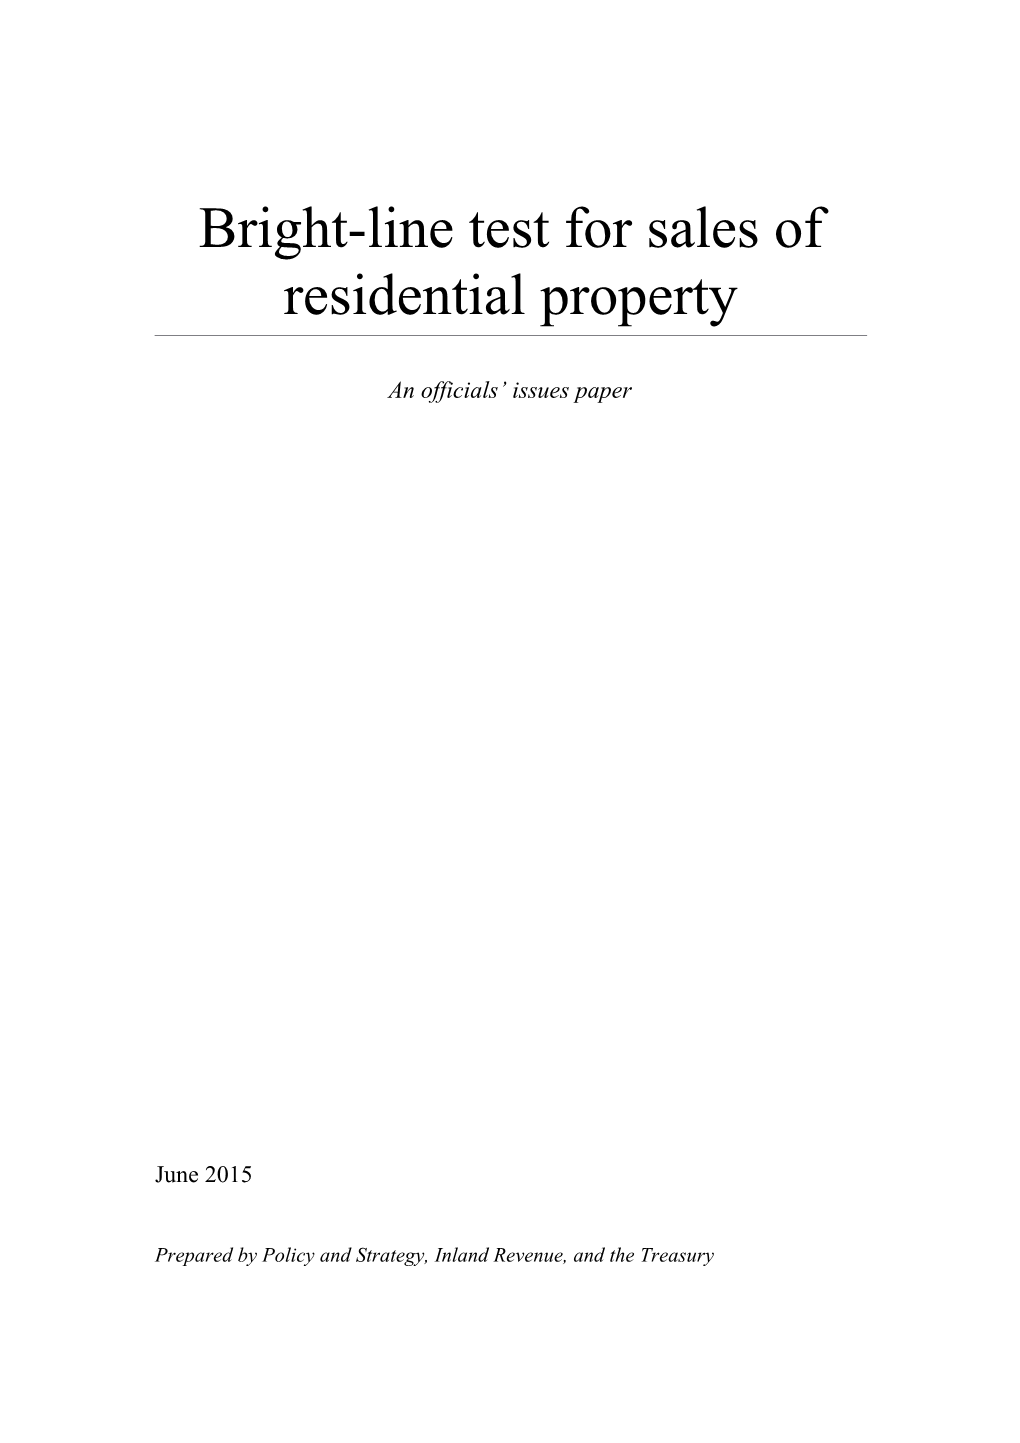 Bright-Line Test for Sales of Residential Property - an Officials' Issues Paper (June 2015)